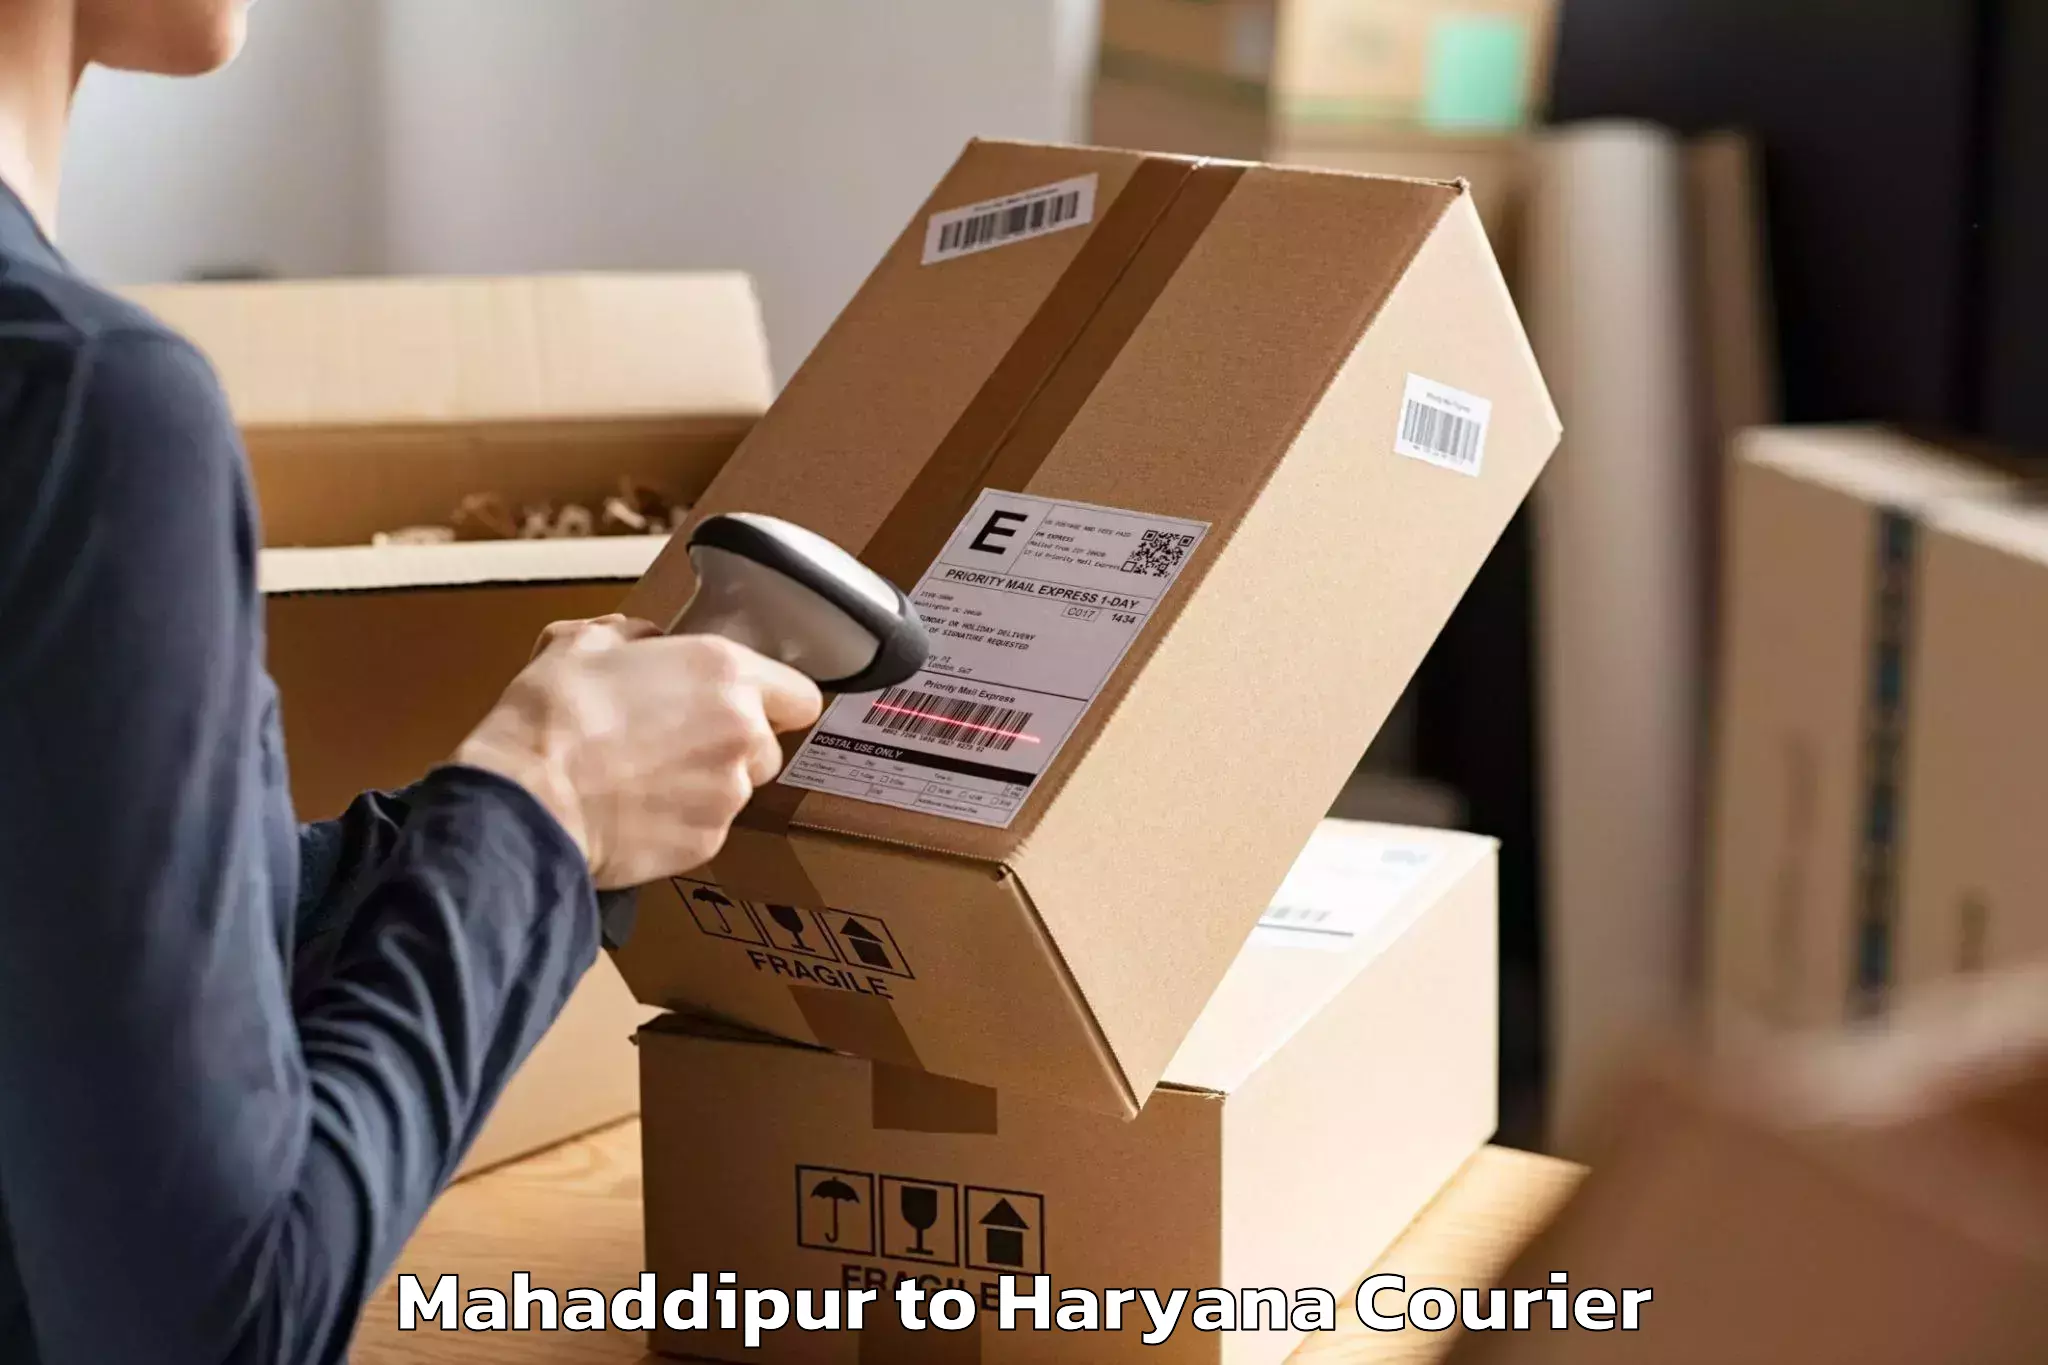 Efficient relocation services in Mahaddipur to Dharuhera